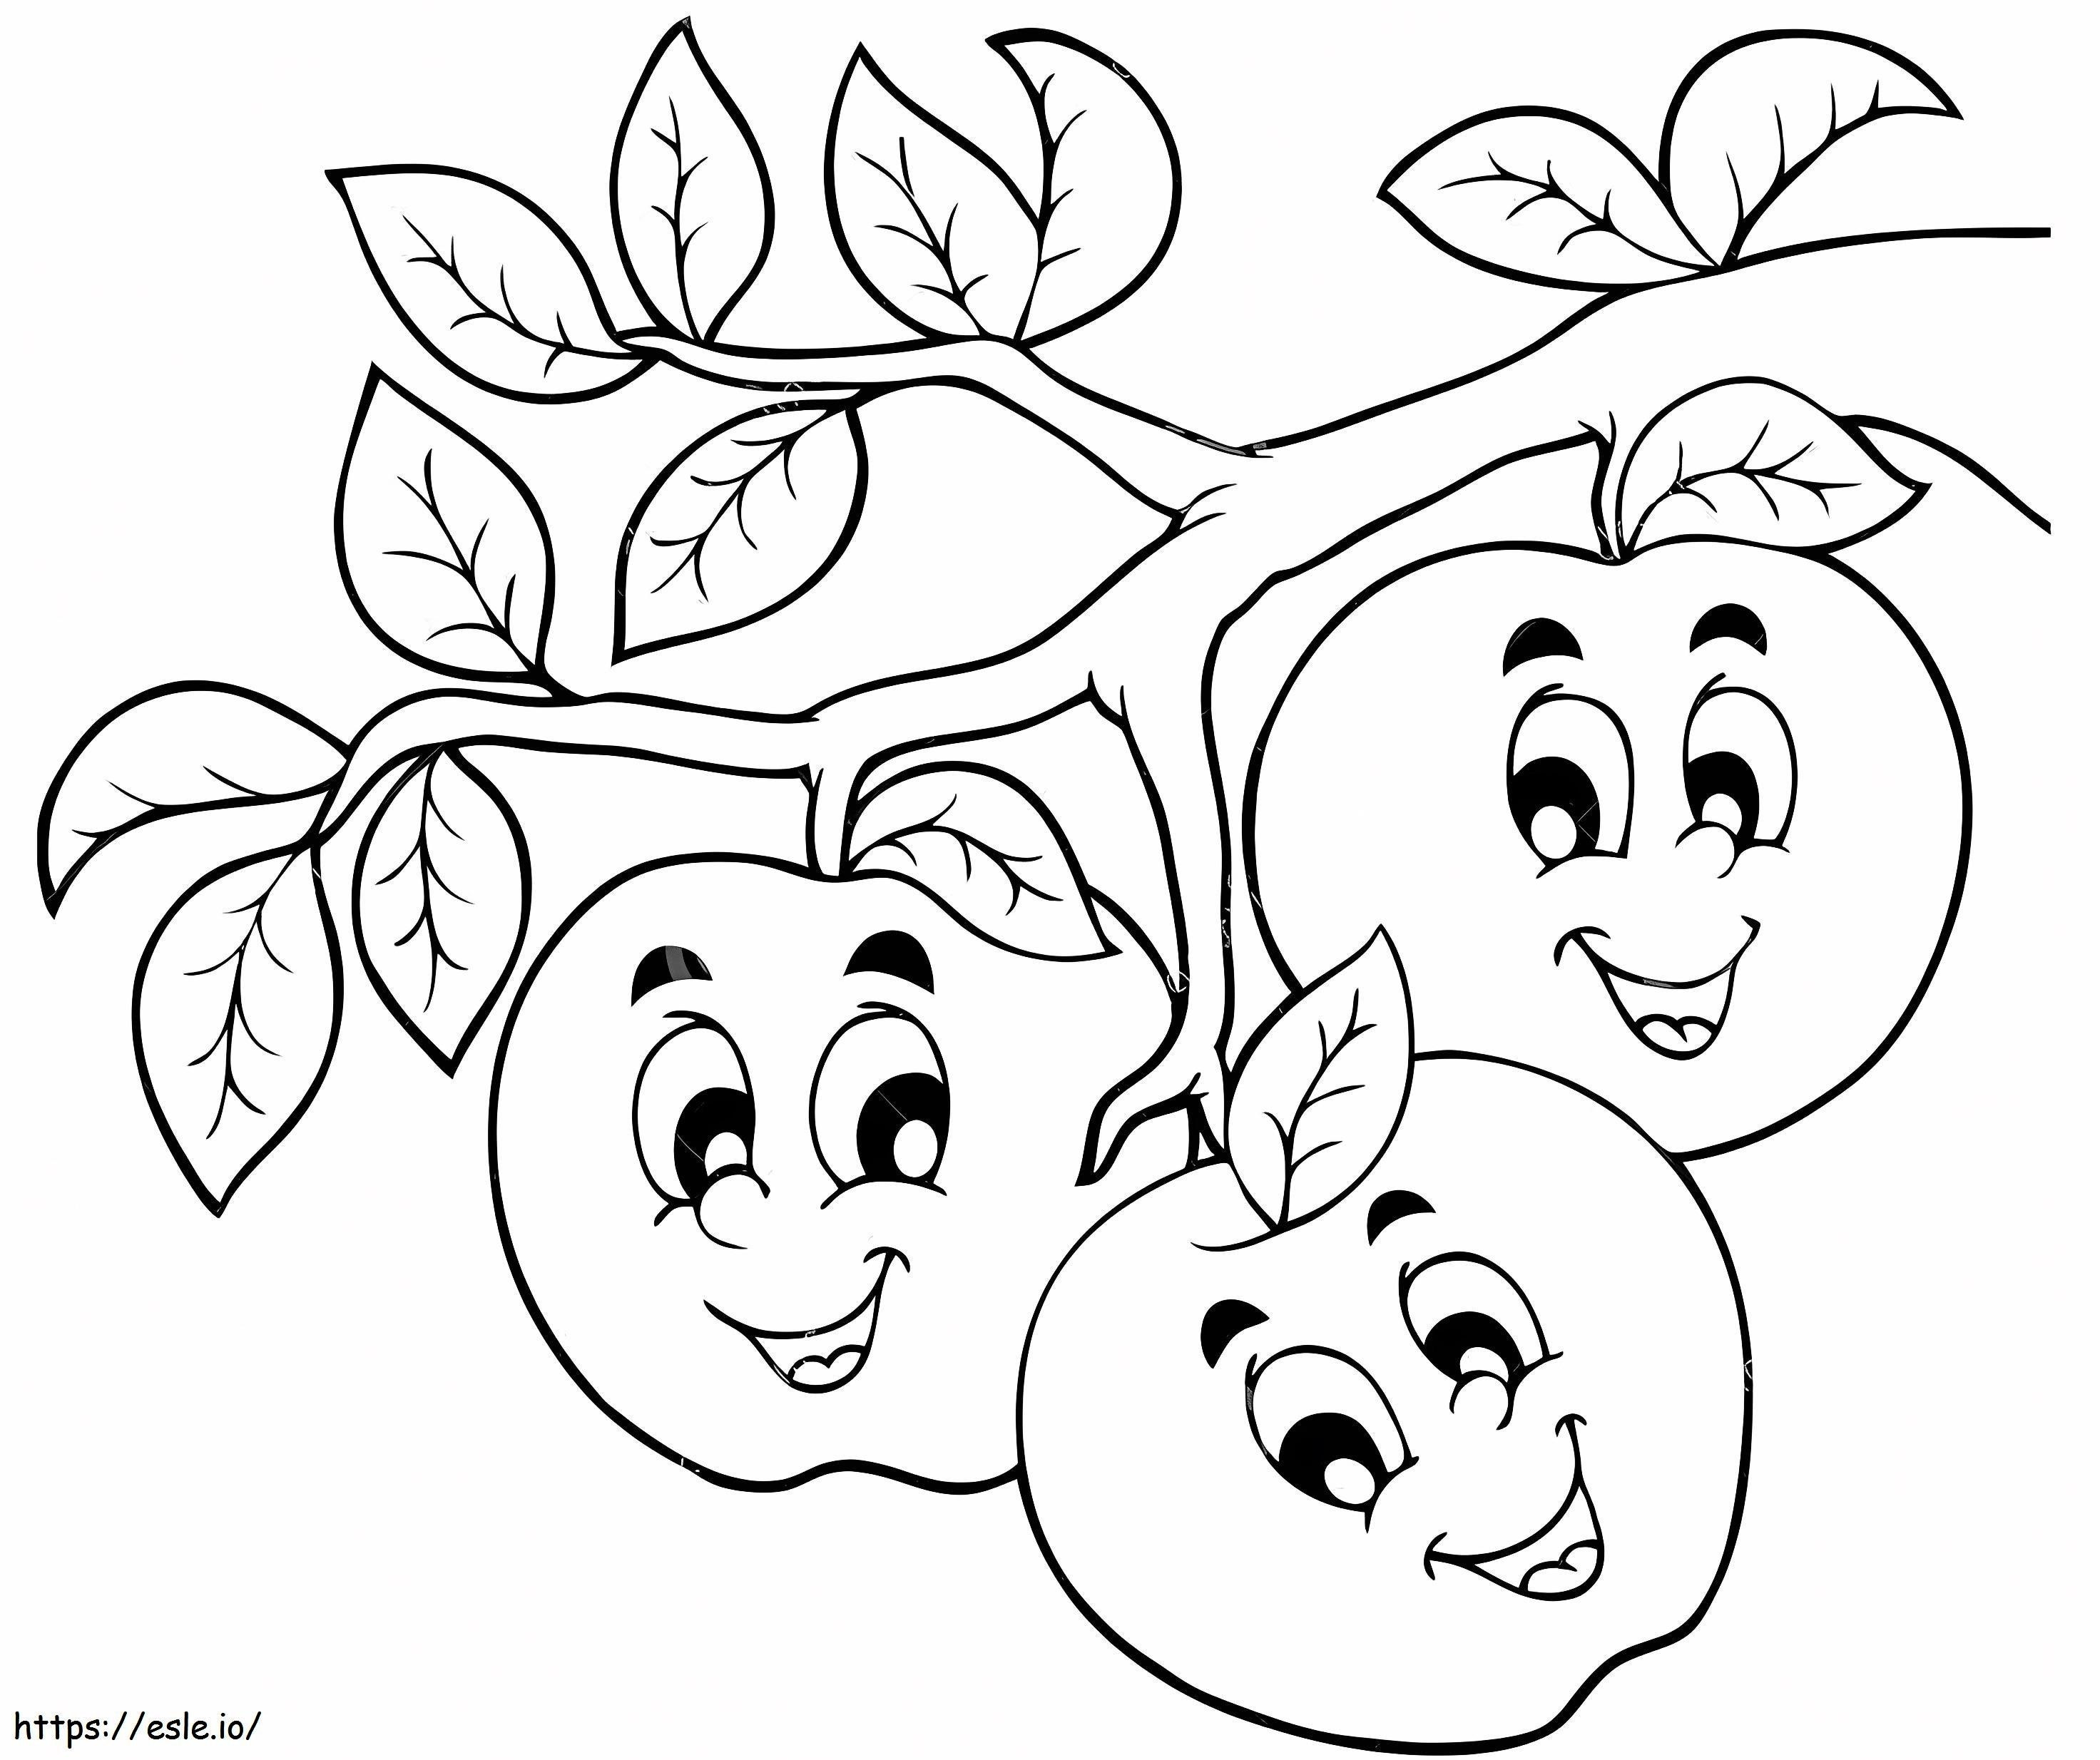 1528423646 Apple coloring page